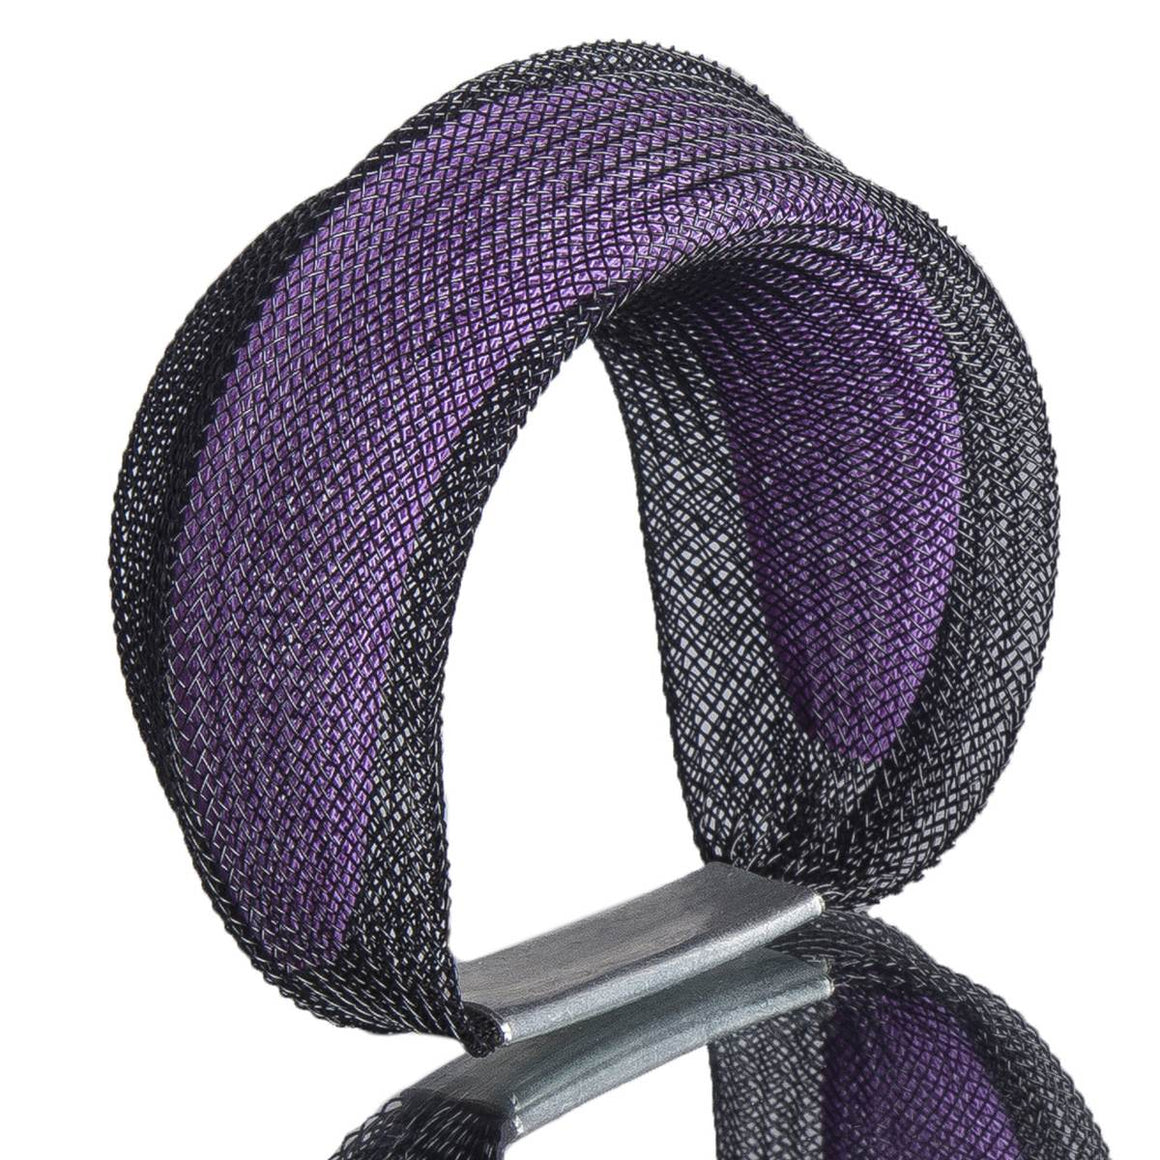 A black and purple bracelet made from finely woven nylon mesh. A purpler mesh tube in visible contained inside a black mesh tube.